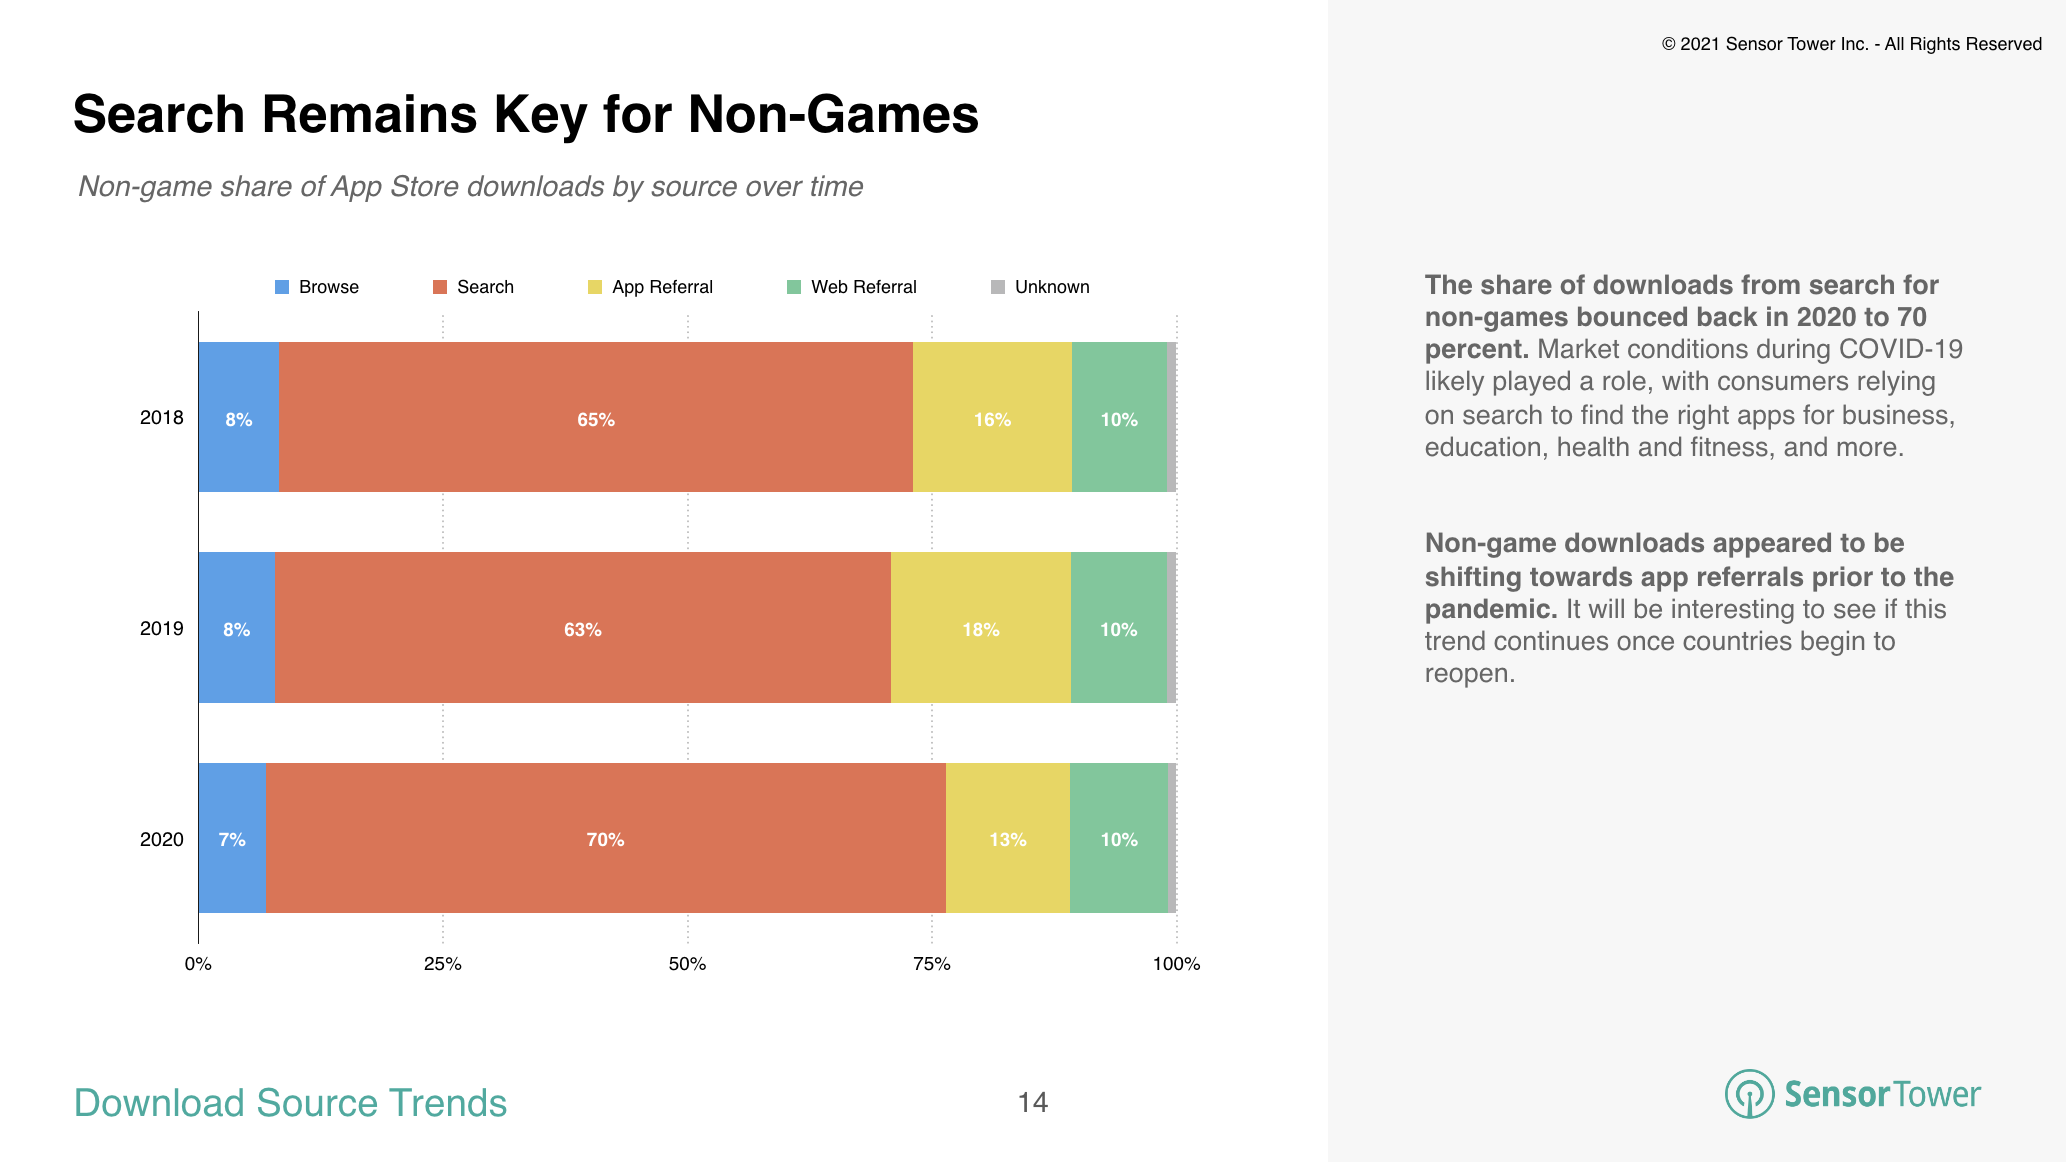 70 percent of non-game app installs came from search in 2020.